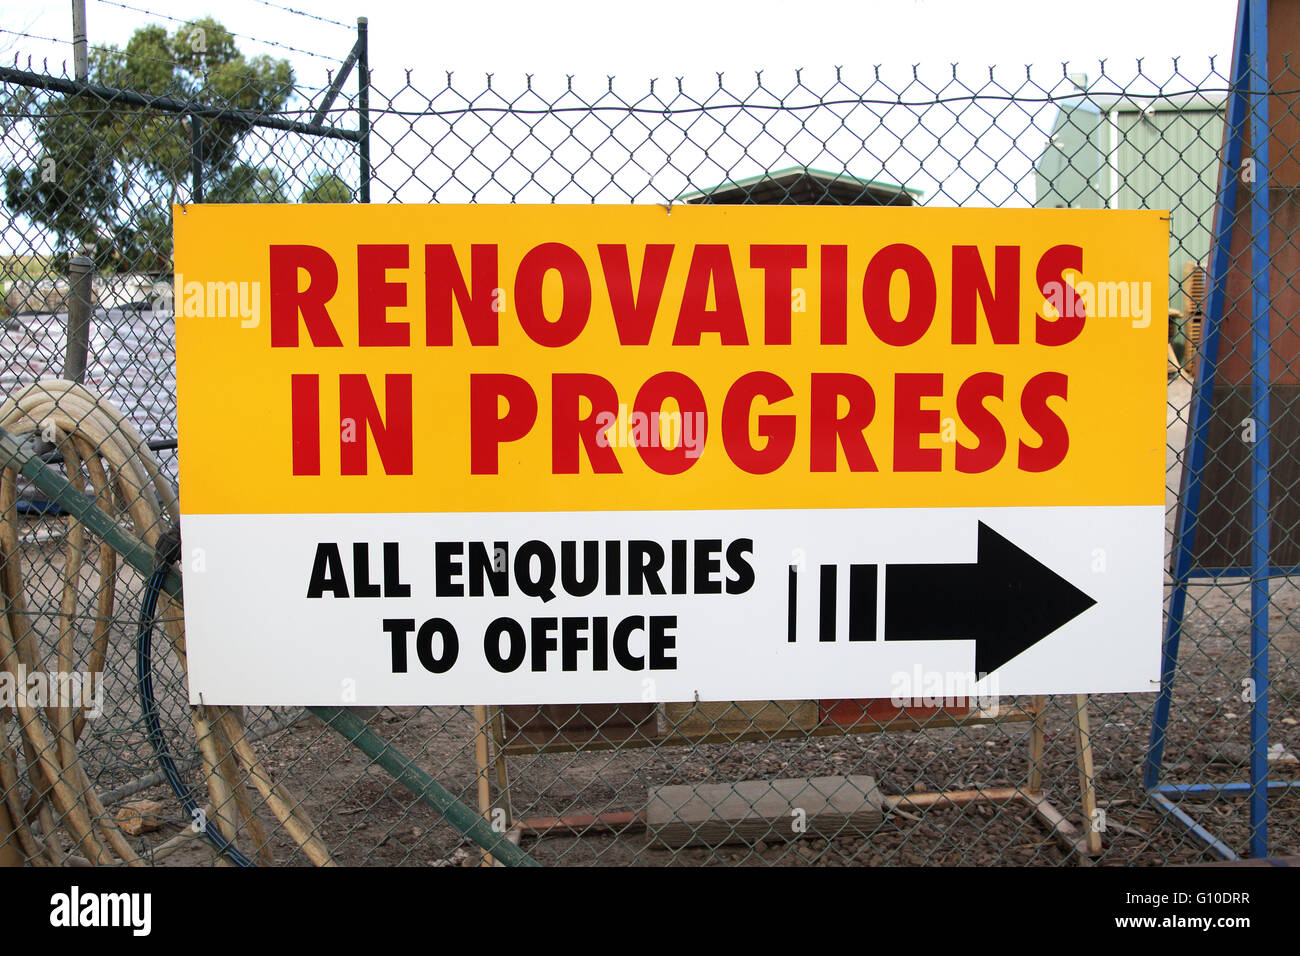 Renovation in Progress signboard against the fence Stock Photo